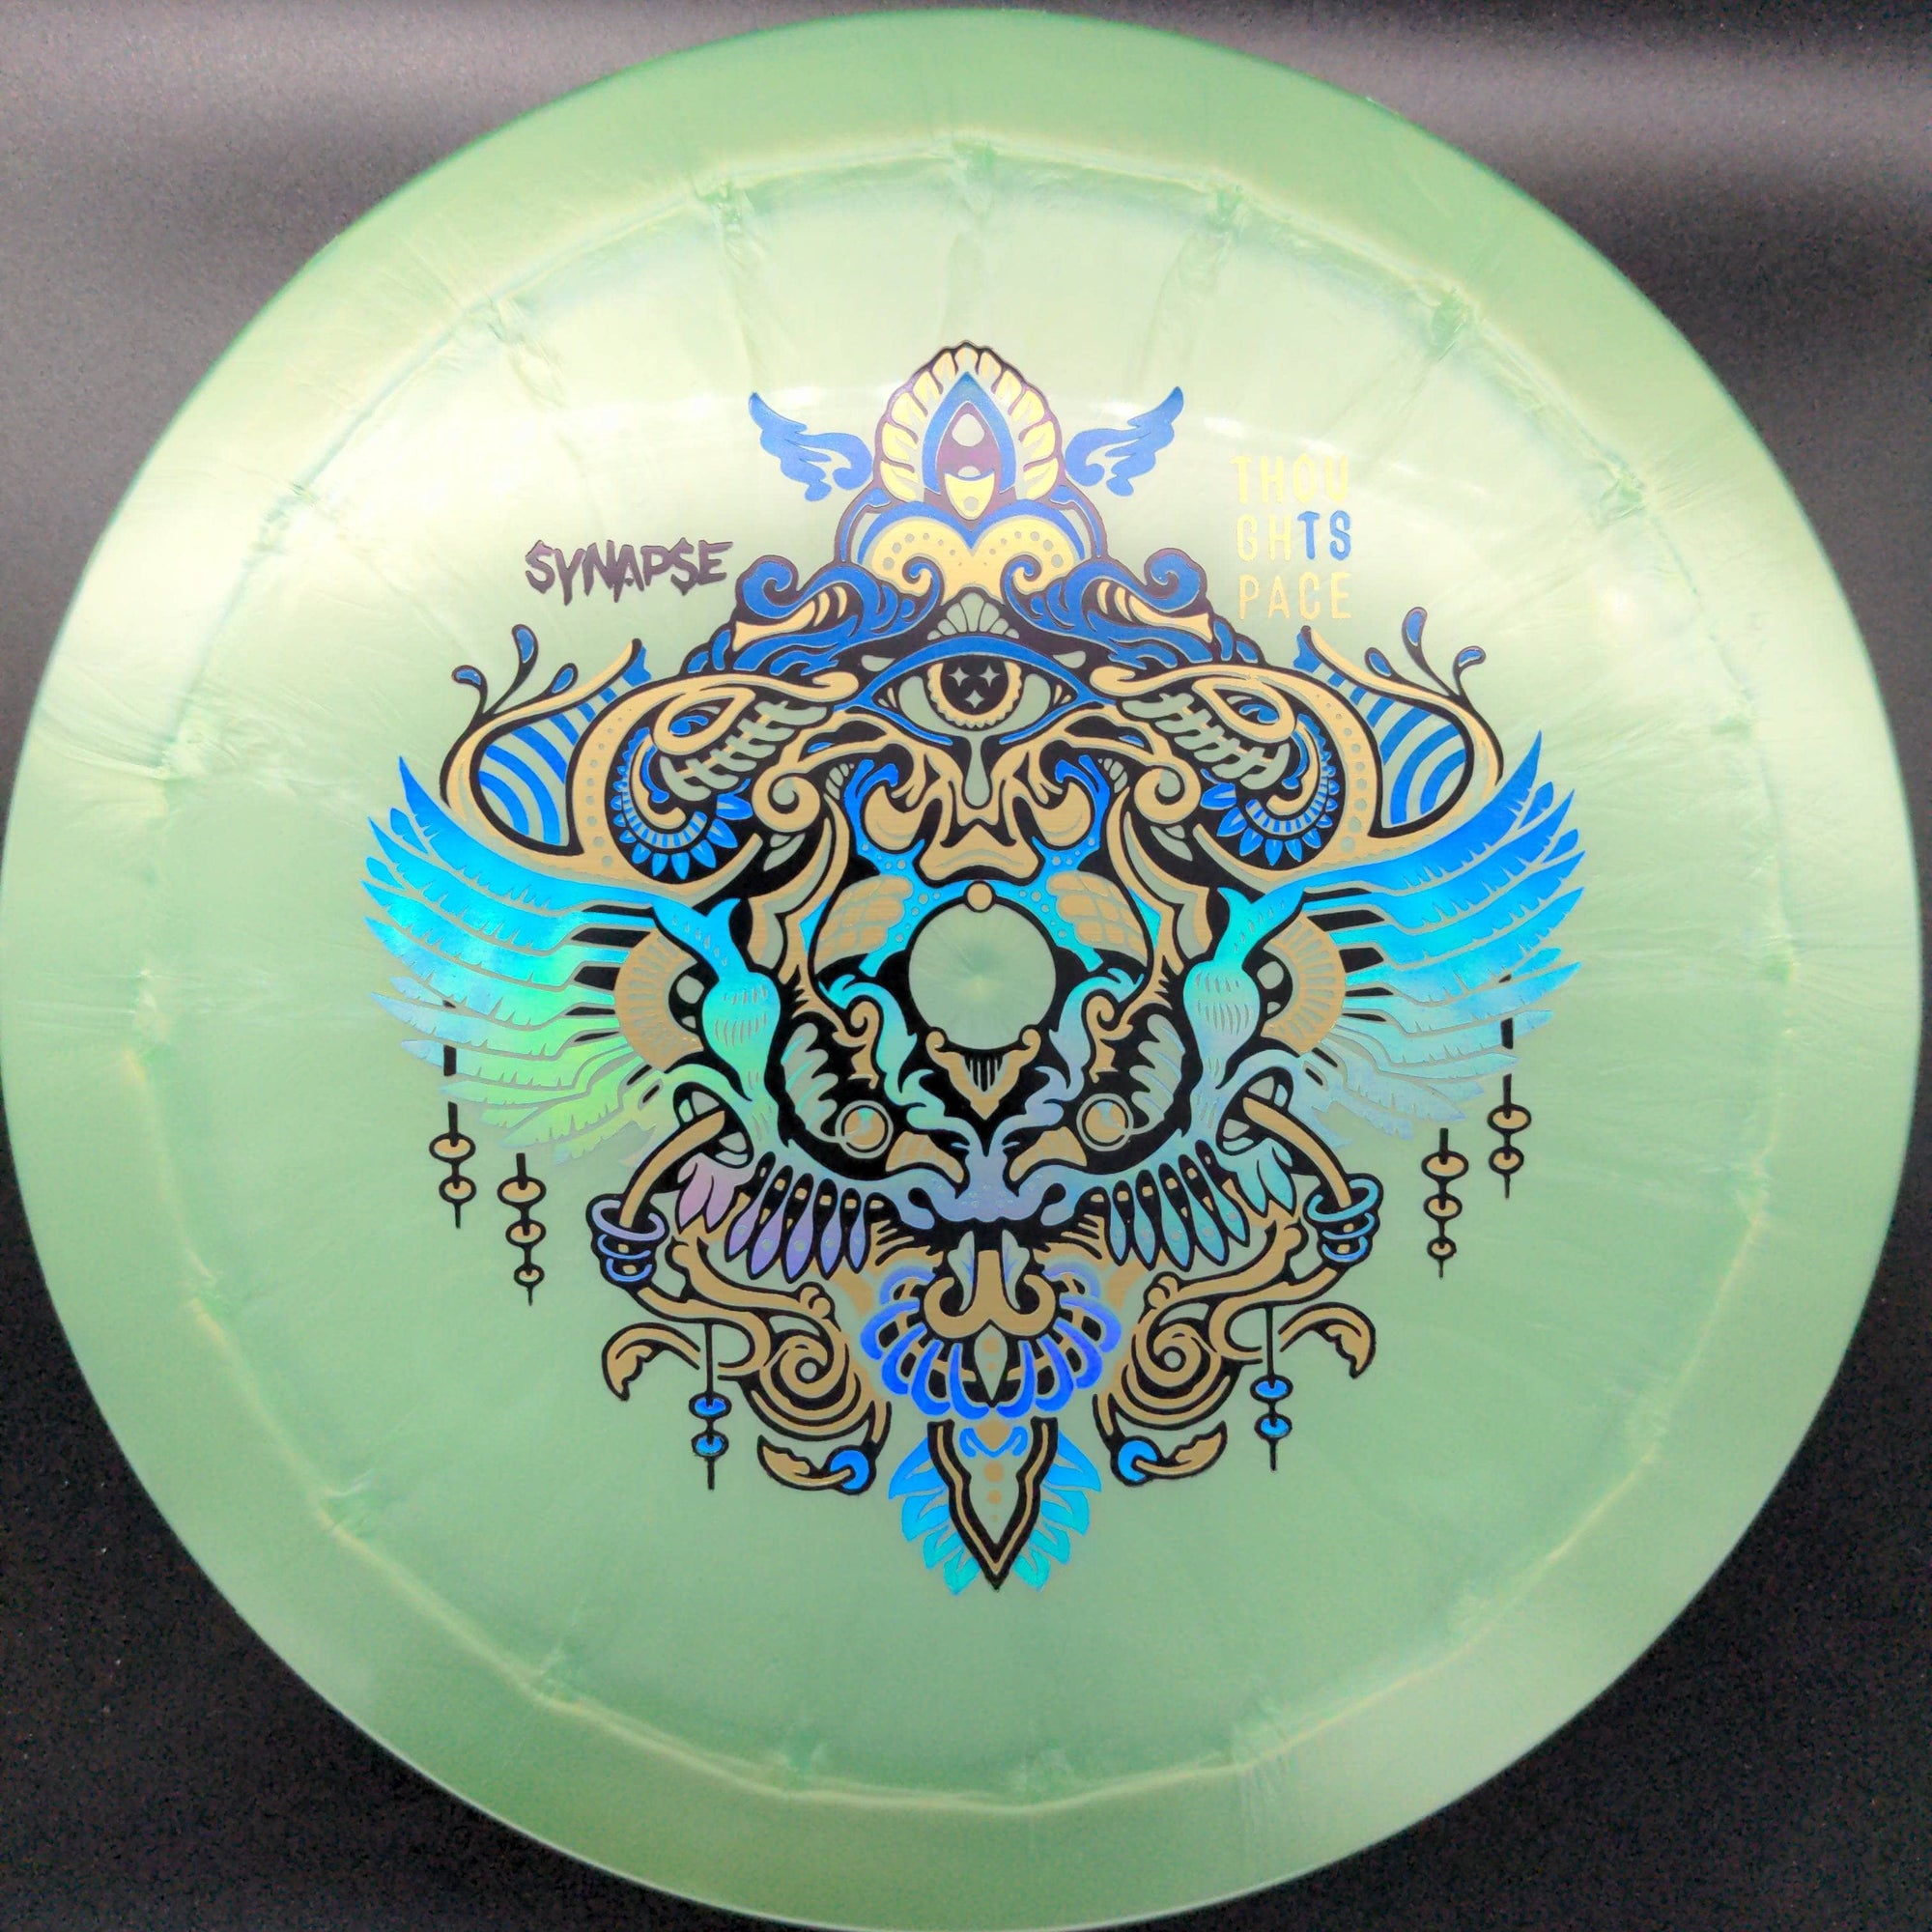 Thought Space Athletics Distance Driver Black Rainbow Stamp 174g Synapse, Ethereal Plastic